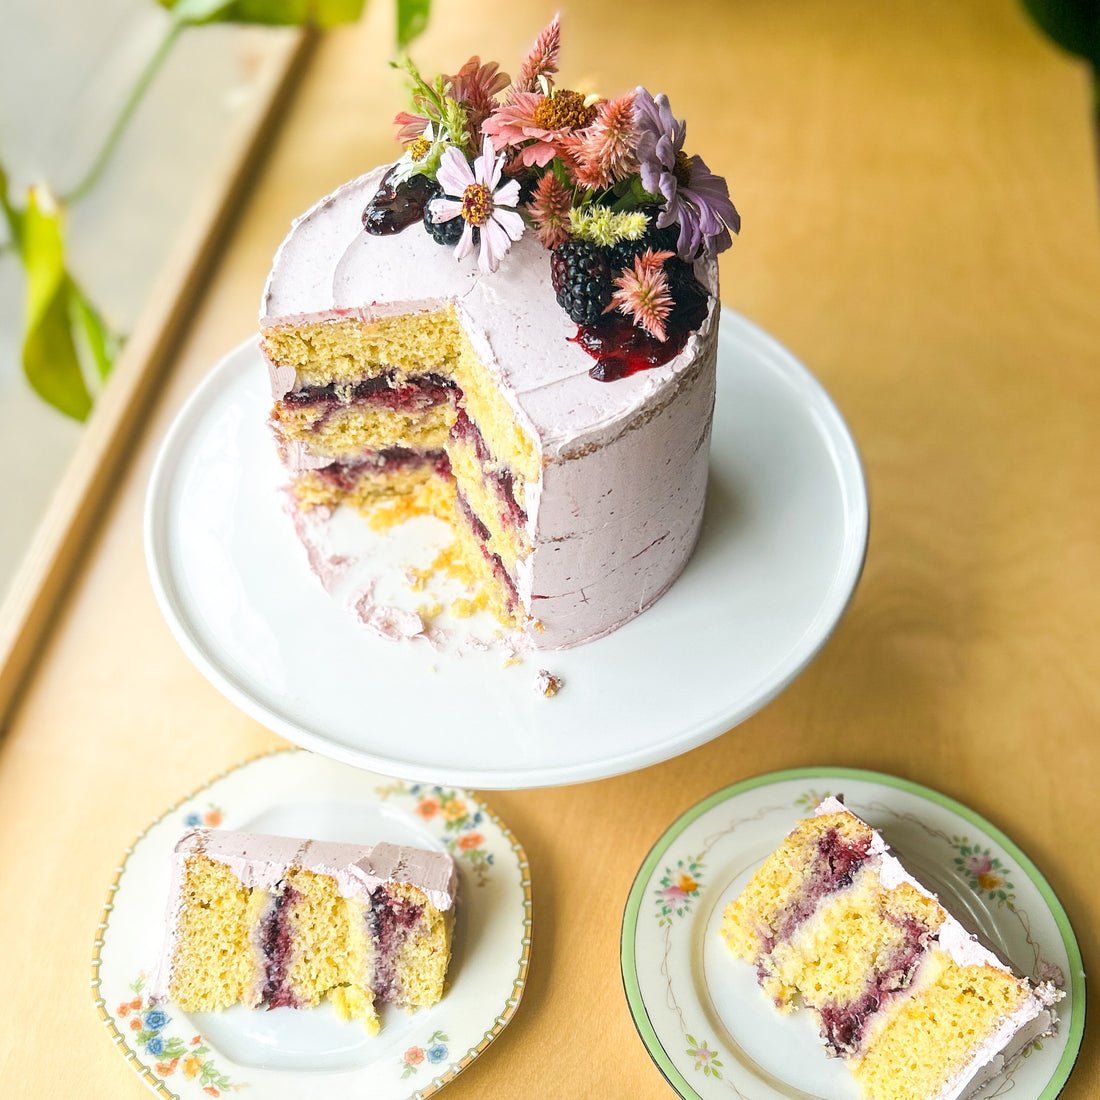 A cake frosted with purple buttercream, cut into slices to reveal layers of yellow cake, sweet corn cream, and blackberry jam.